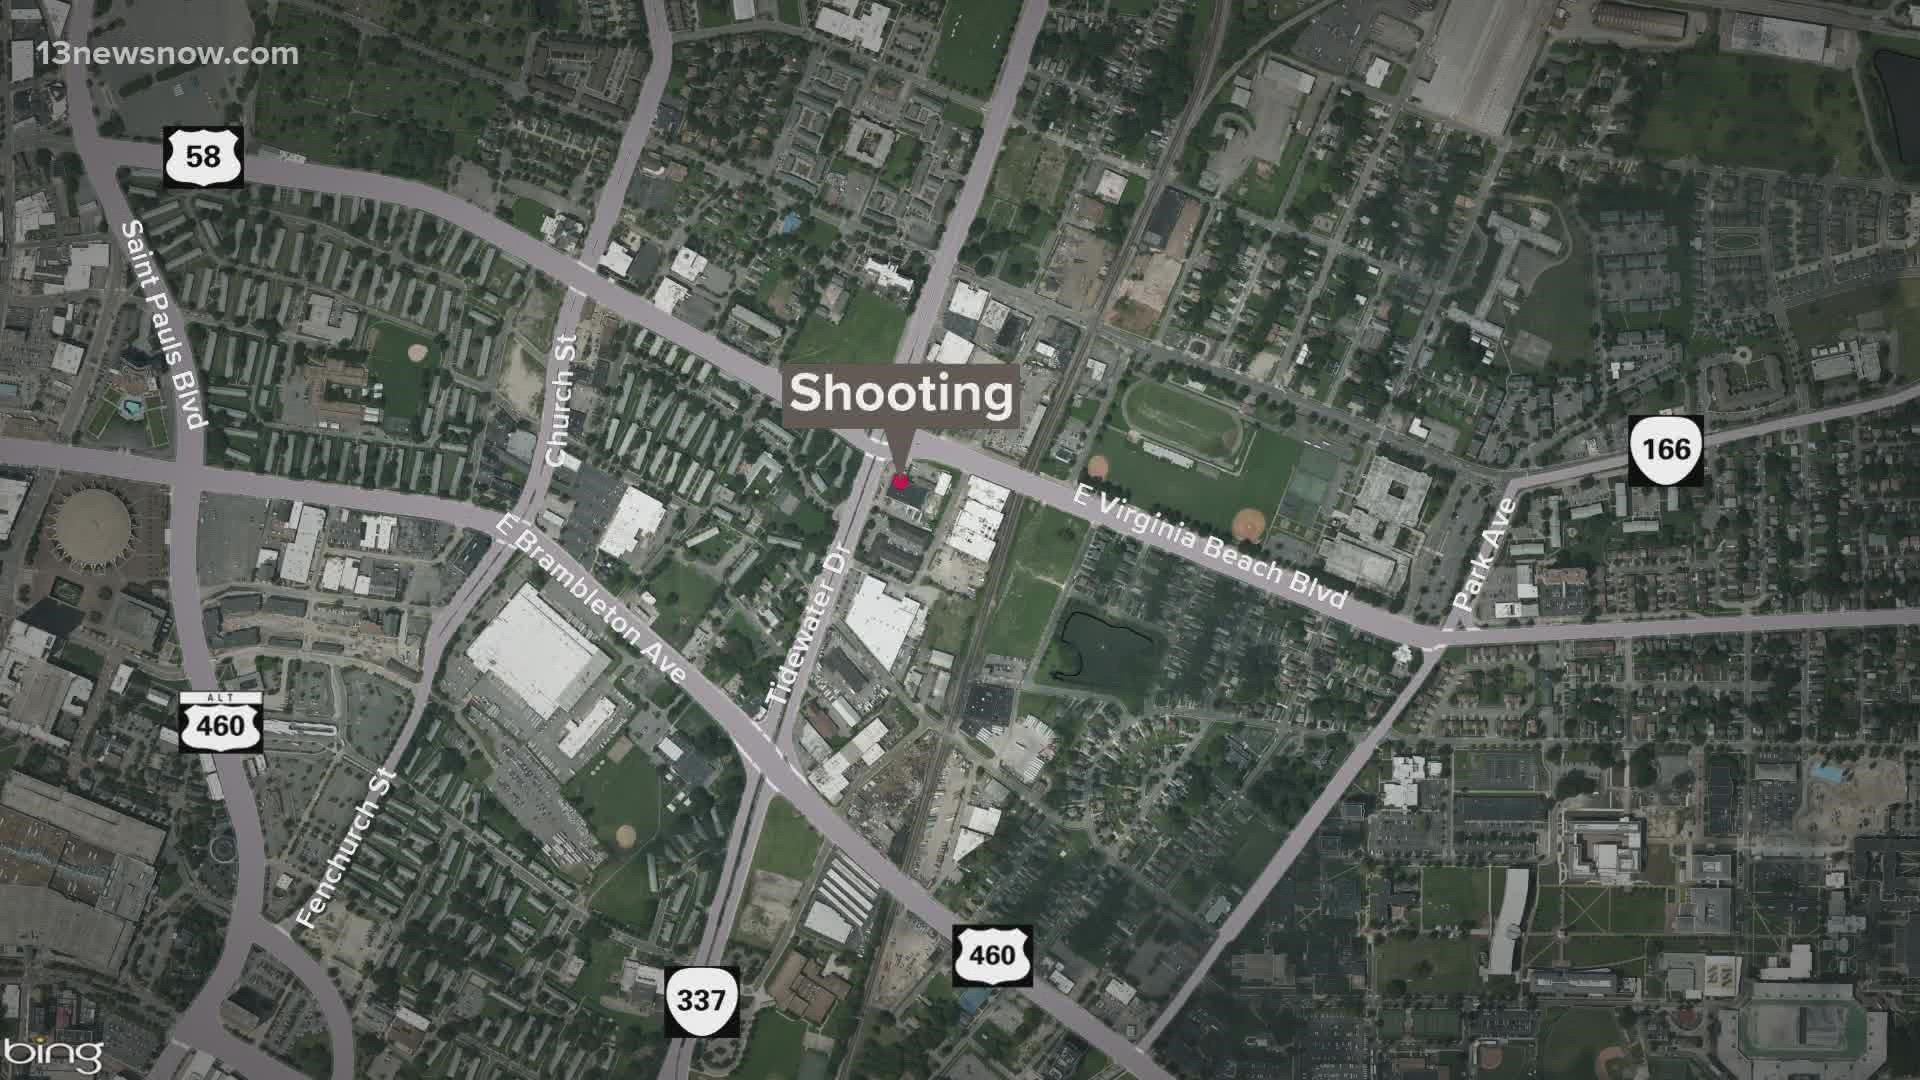 Detectives are investigating a shooting that left a man hurt Thursday night near the Calvert Square section of Norfolk.